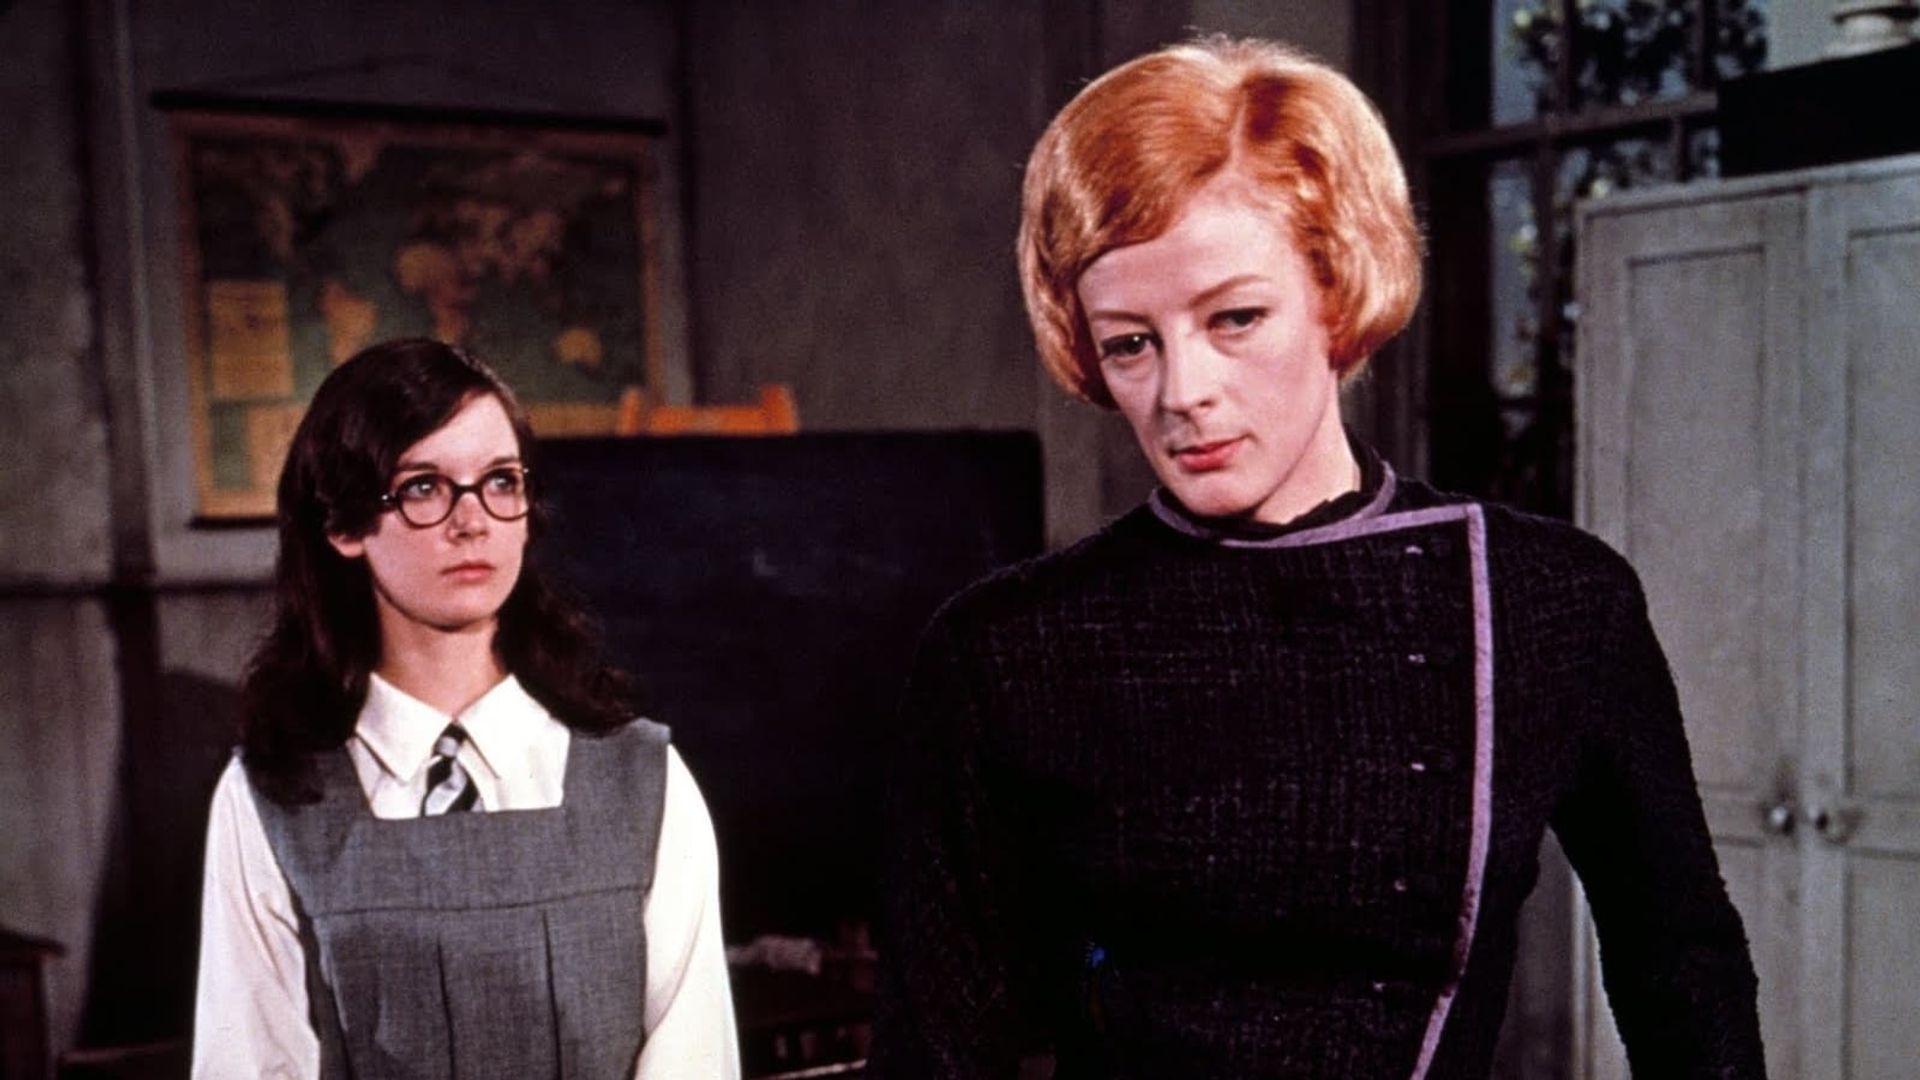 The Prime of Miss Jean Brodie background